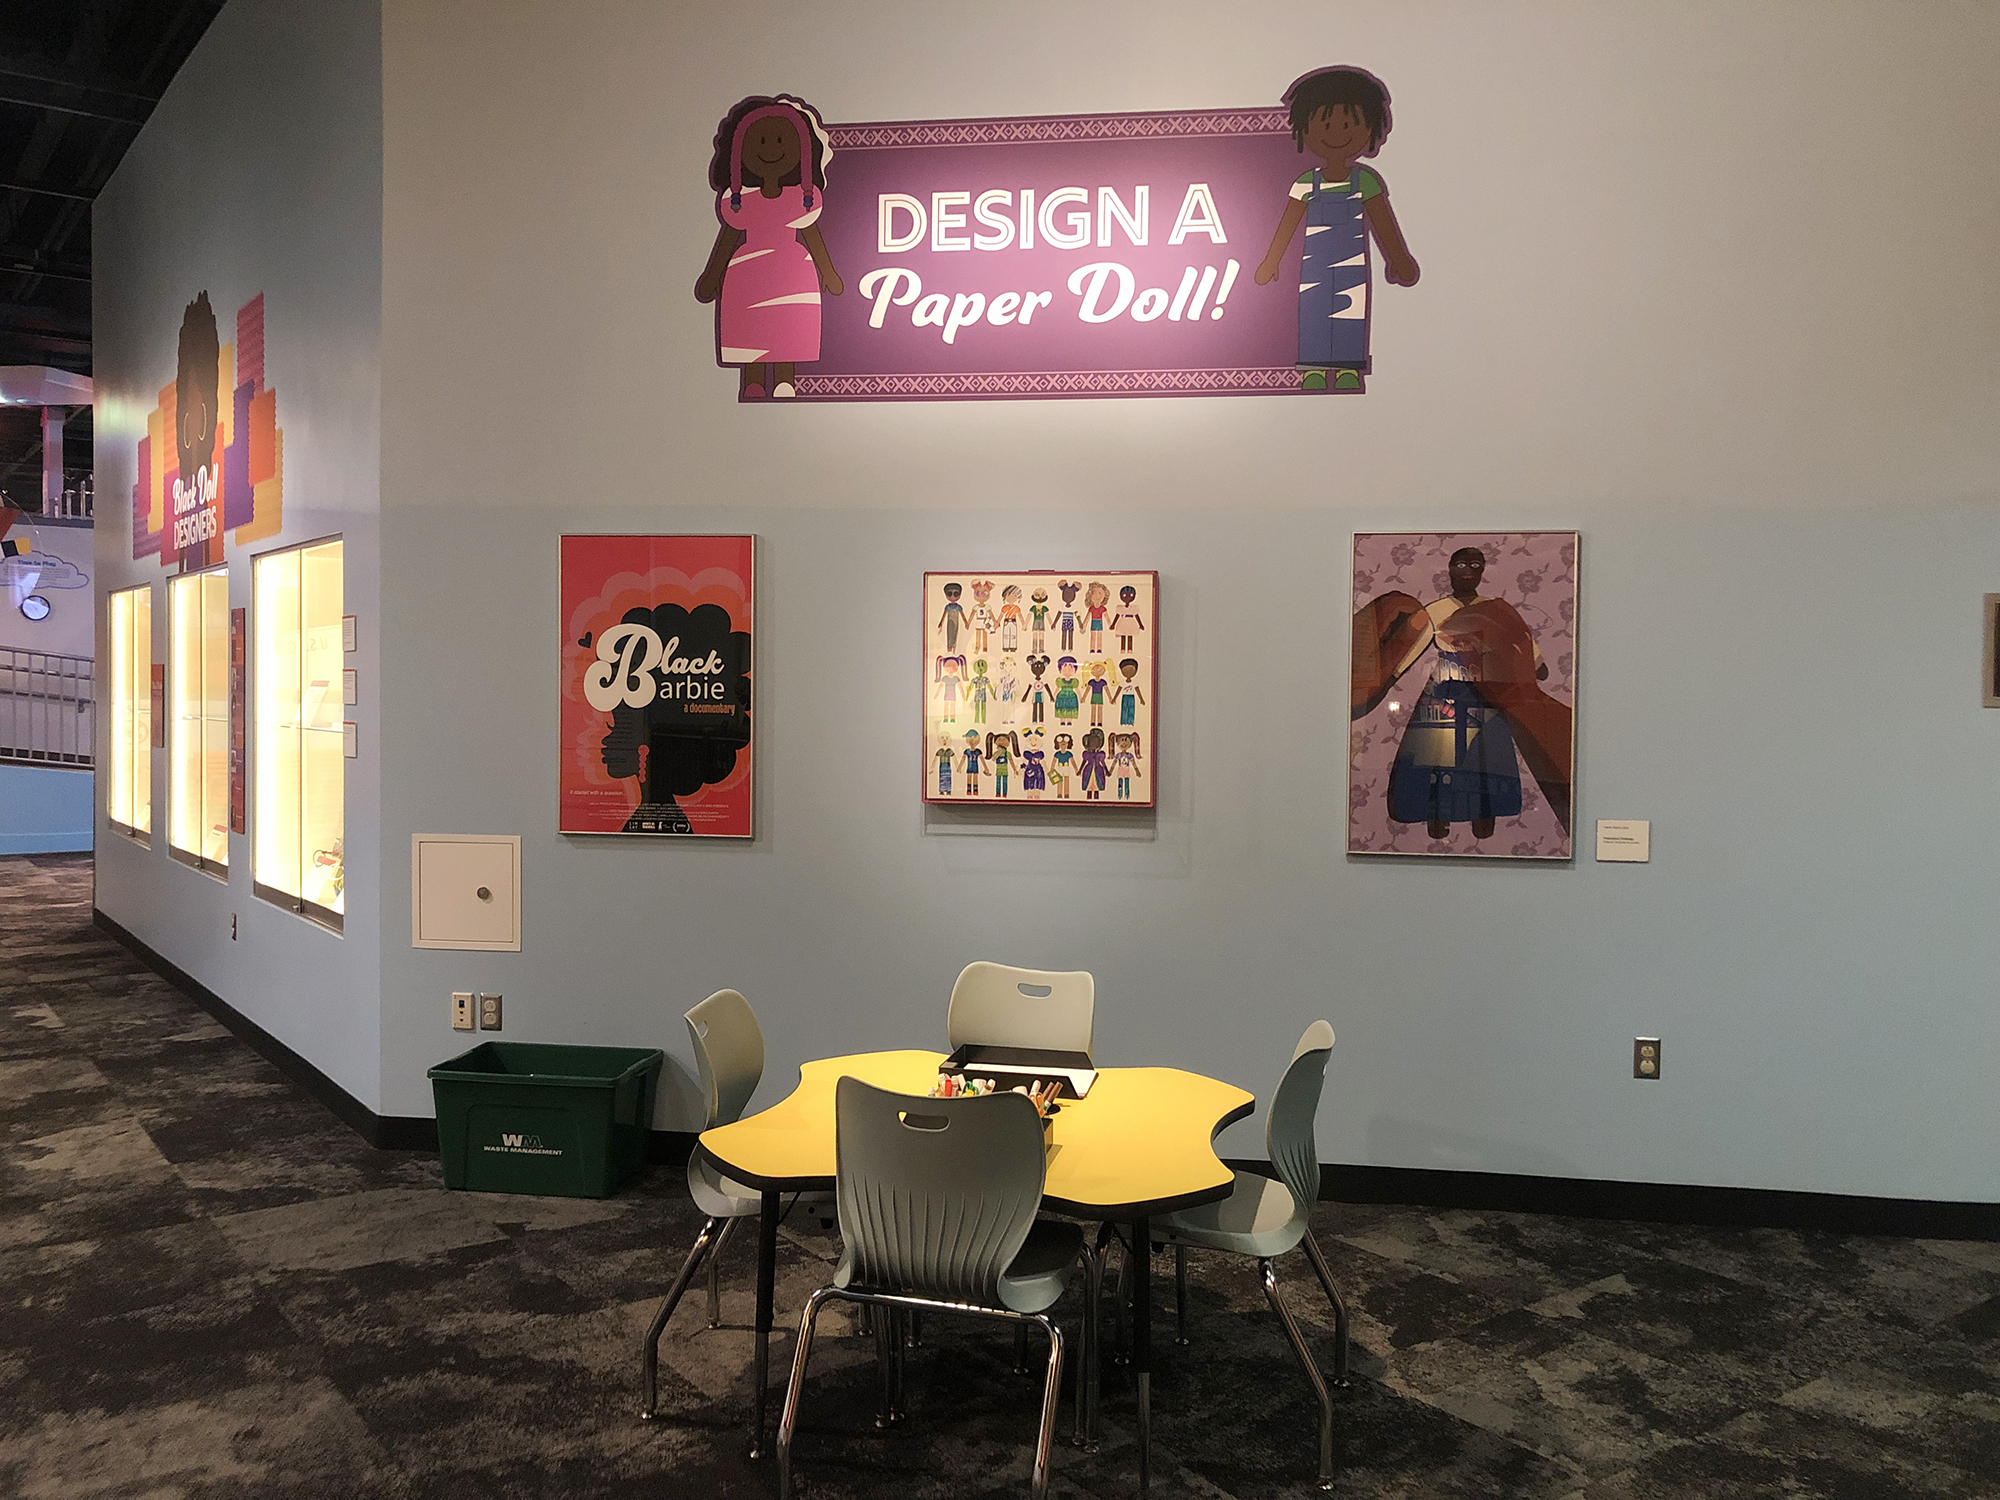 An area for exhibit visitors to make a paper doll.